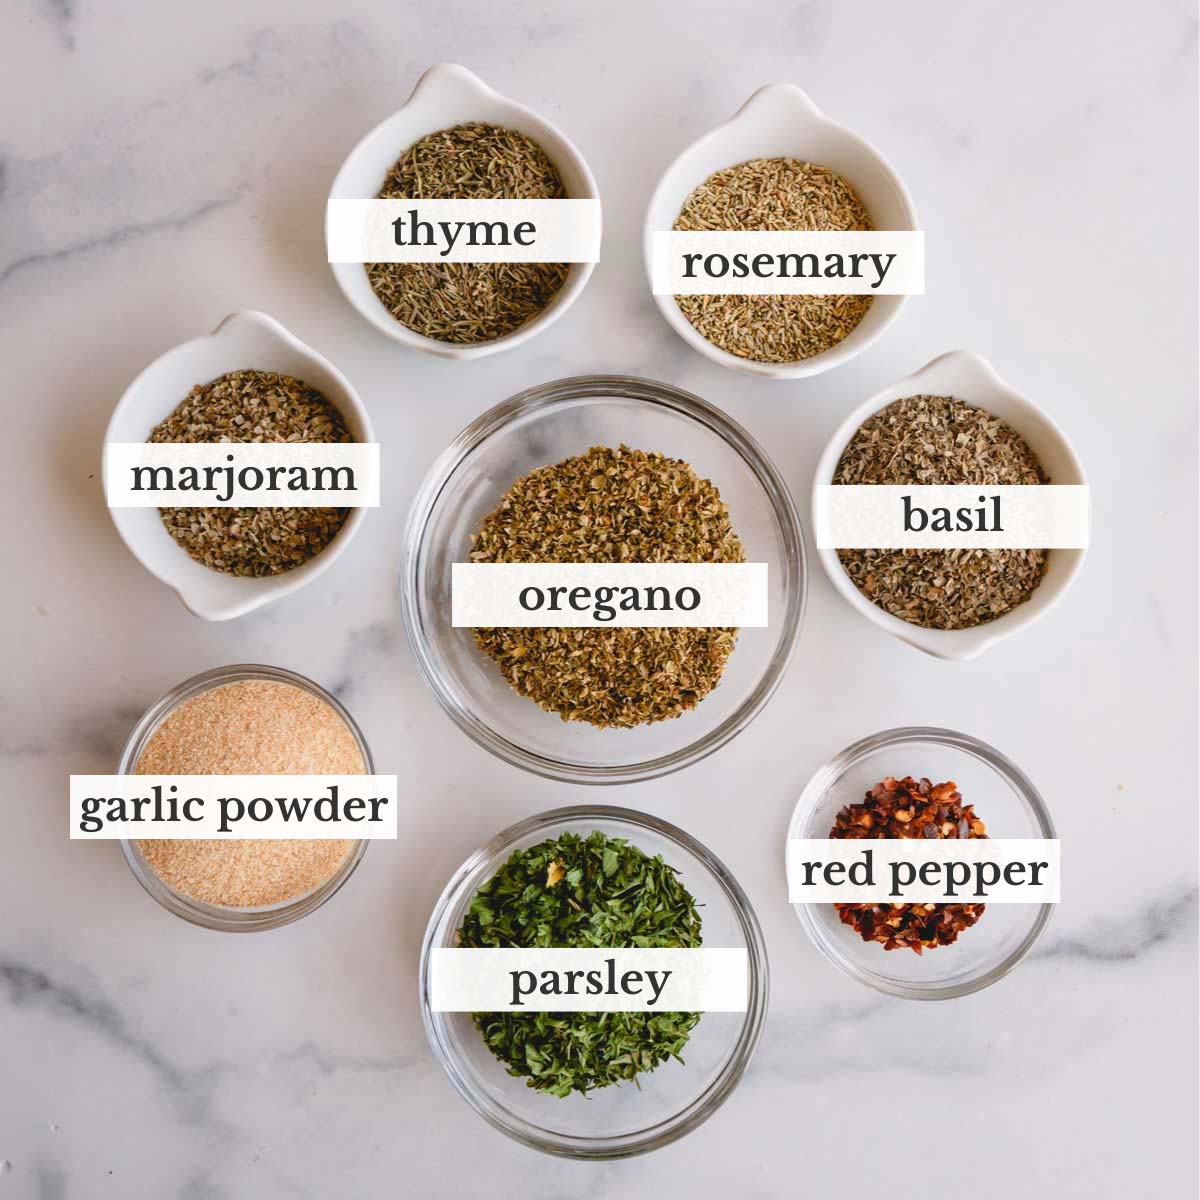 Small bowls of herbs and spices to make homemade Italian seasoning.